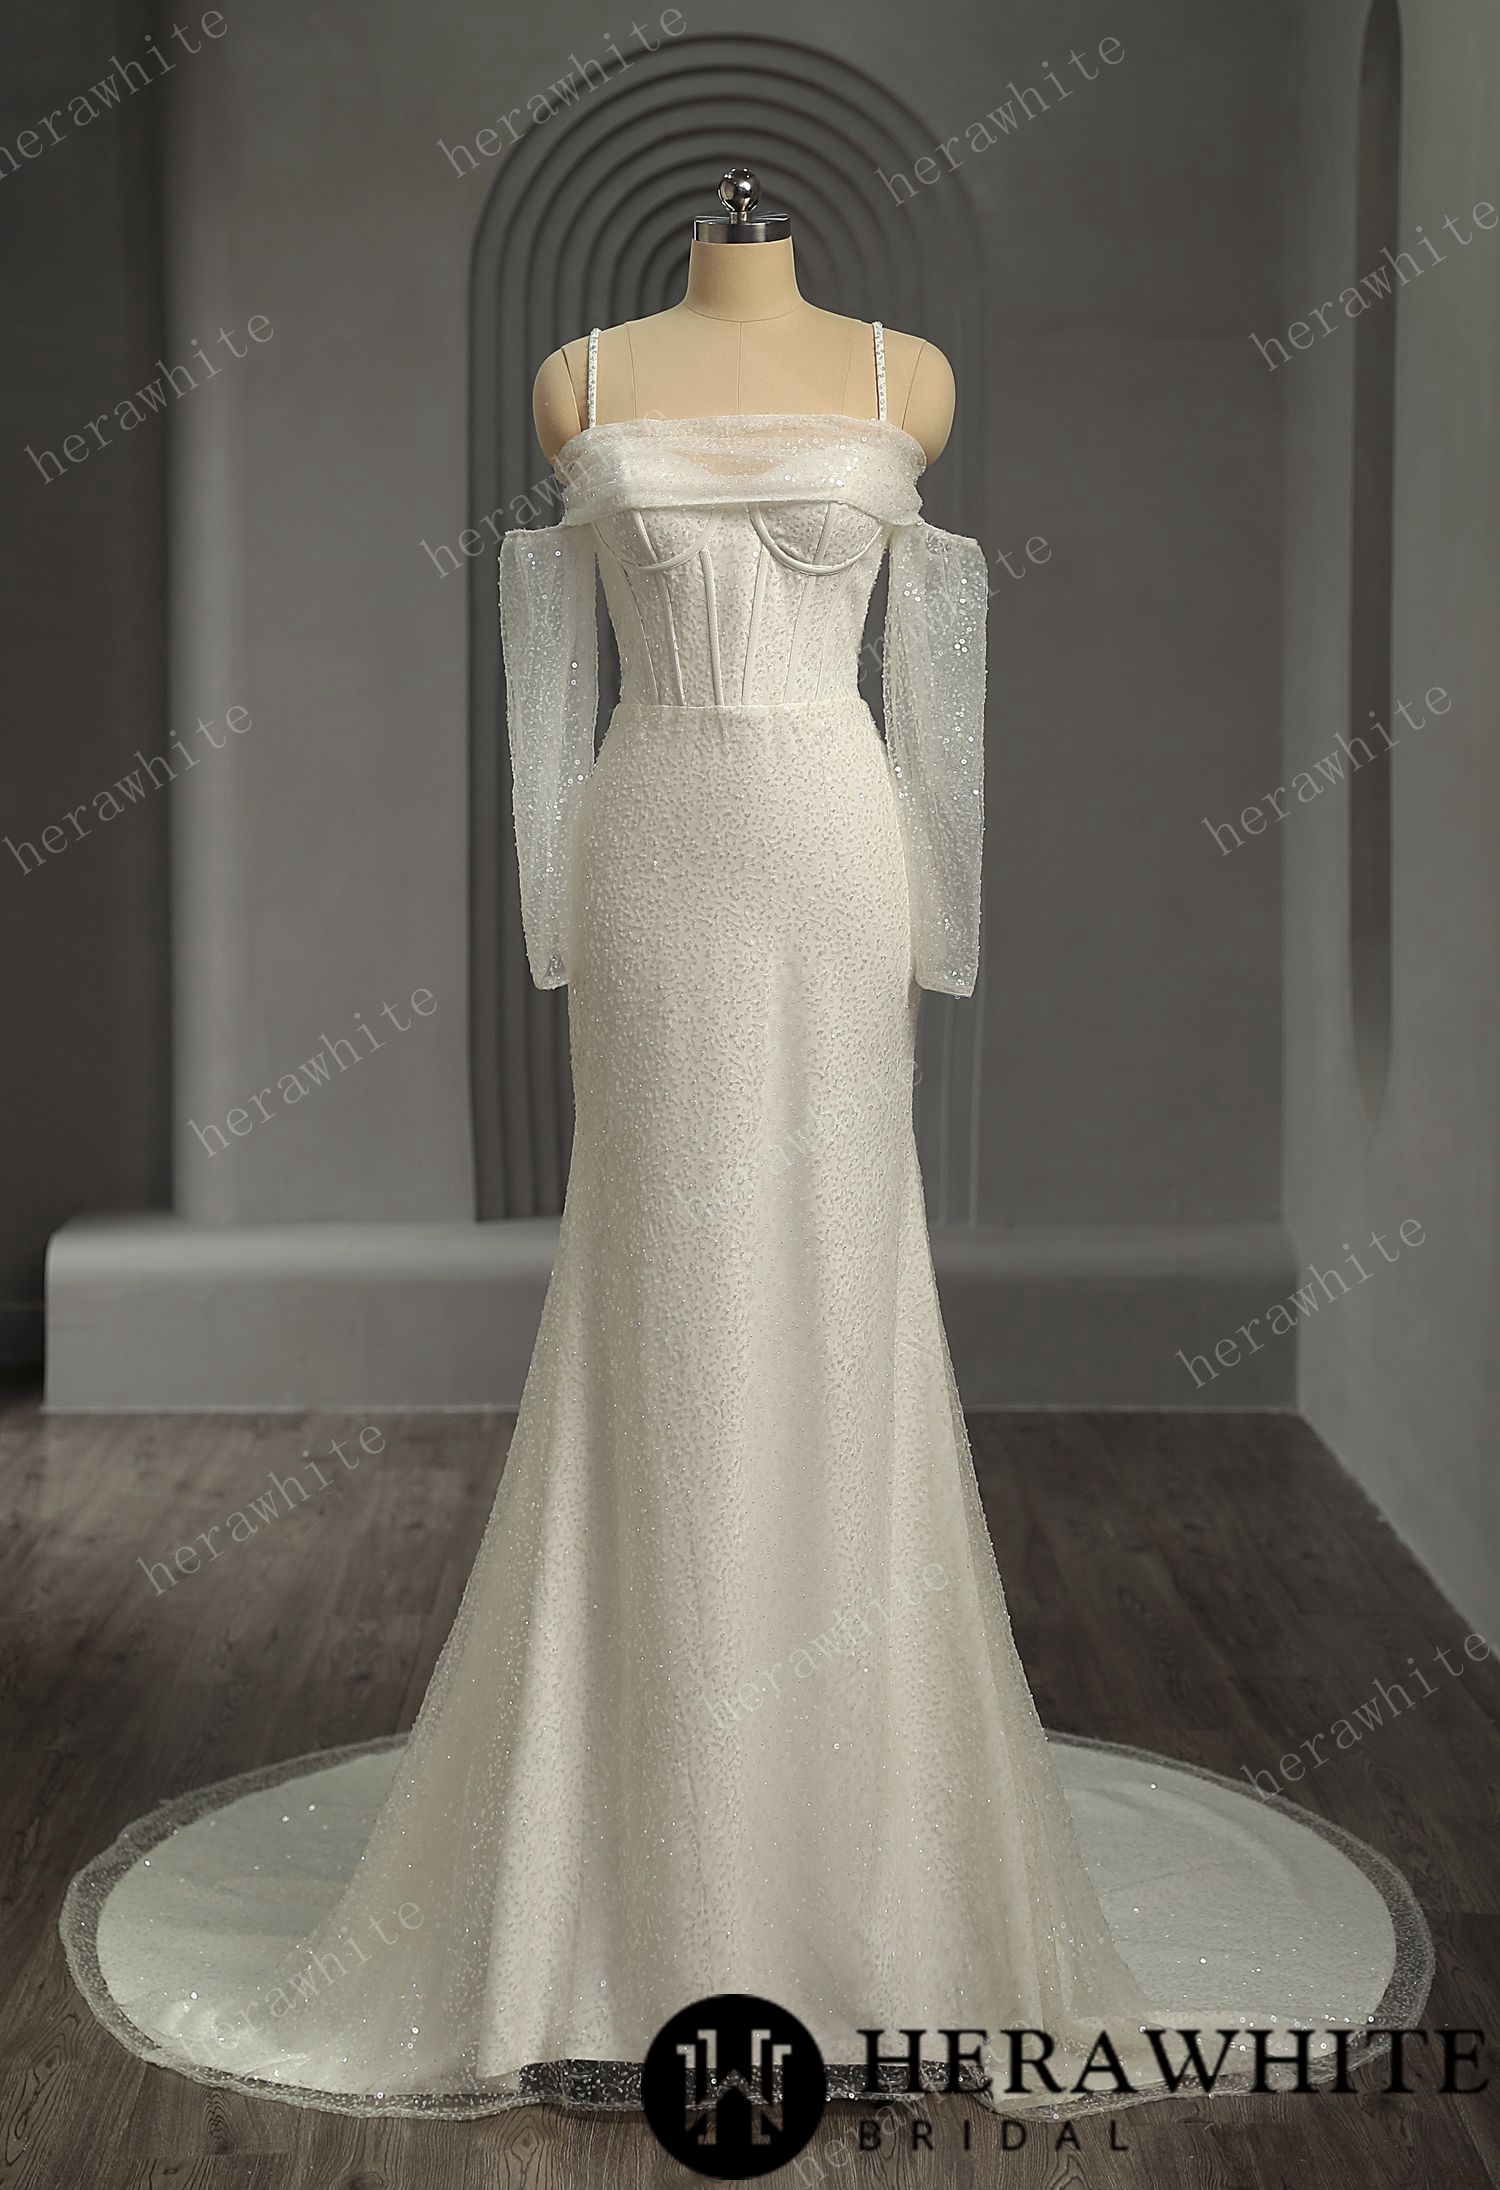 Shiny Beaded Luxury Off-the-Shoulder Wedding Dress With Detachable Sleeves